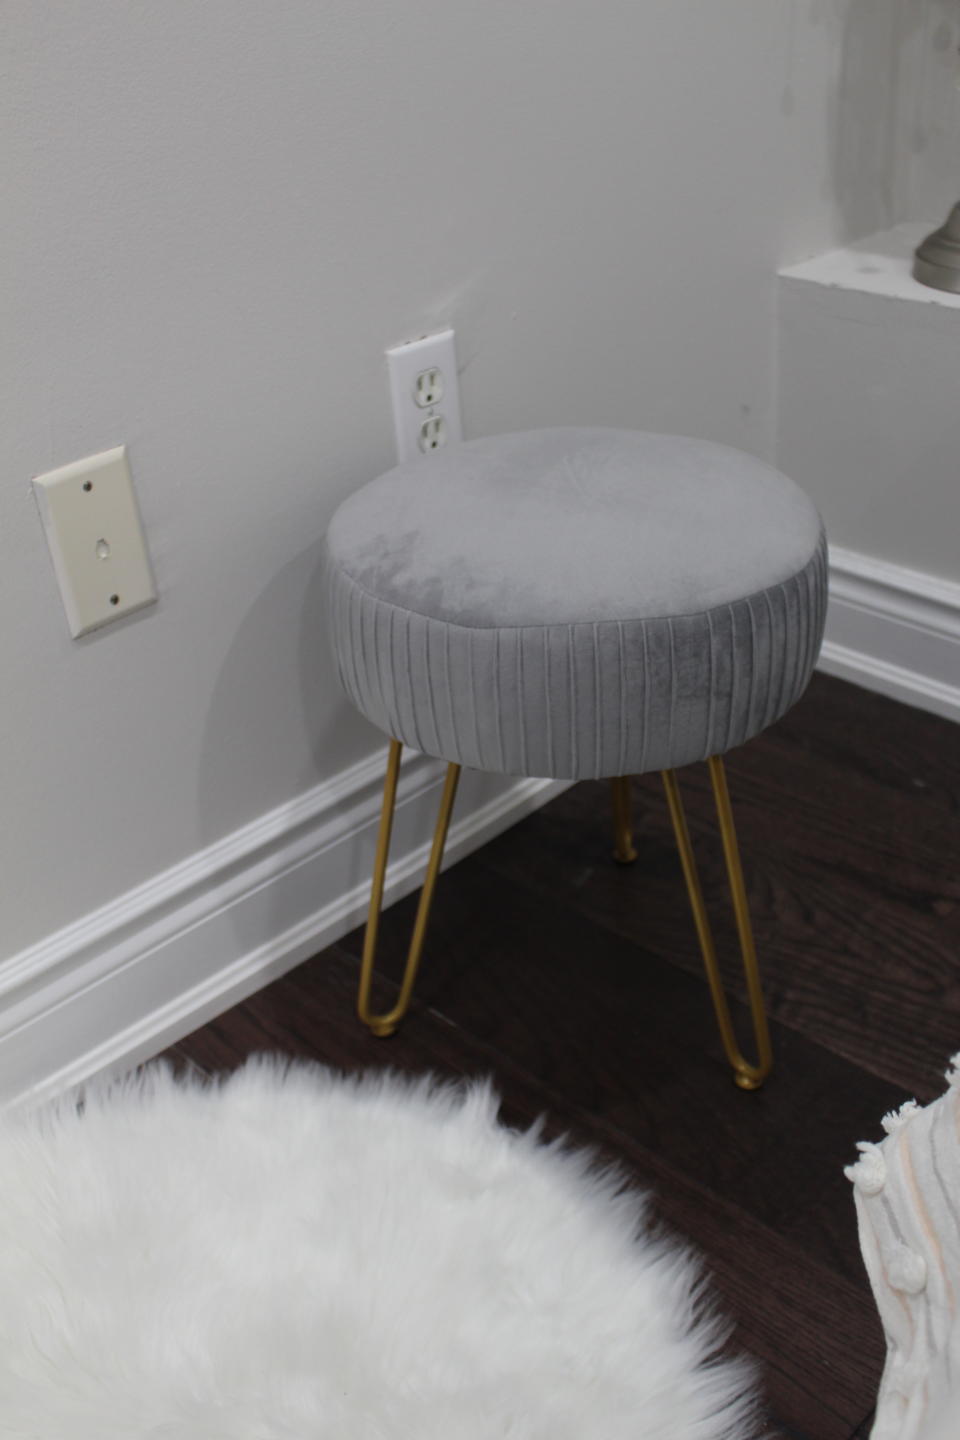 I love that this velvet stool adds a statement to my room (plus it's really comfy!). (Photo via Farah Khan)